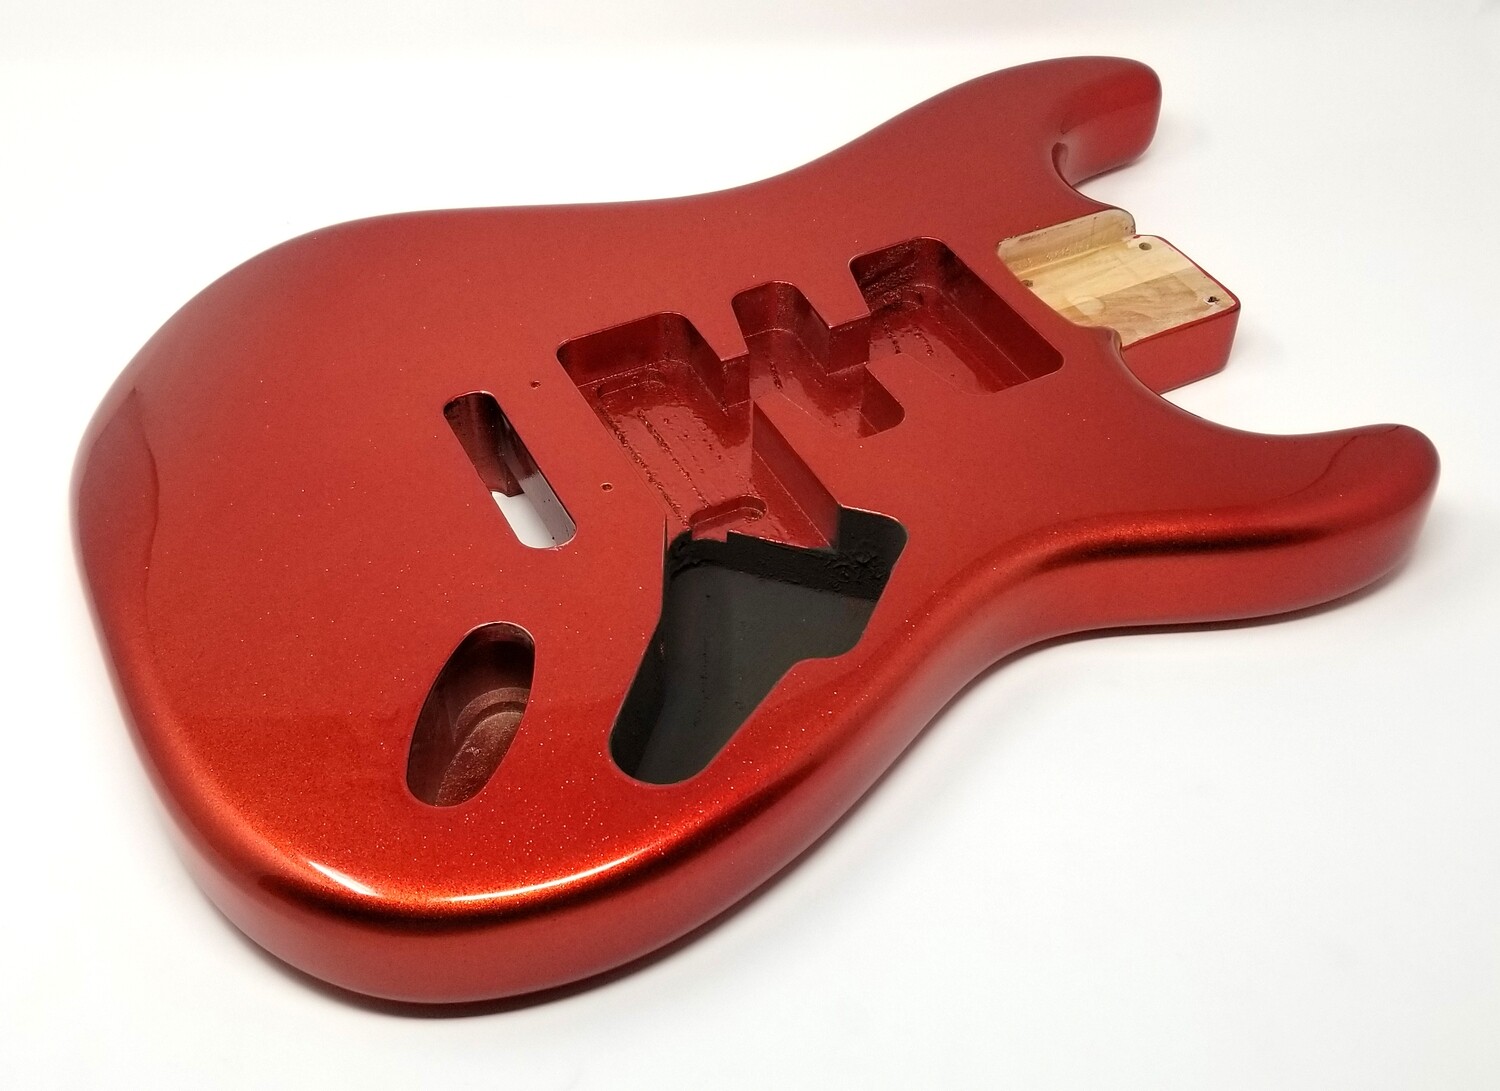 Candy Apple Red Sparkle S-Style Replacement Body - 2 pcs Alder